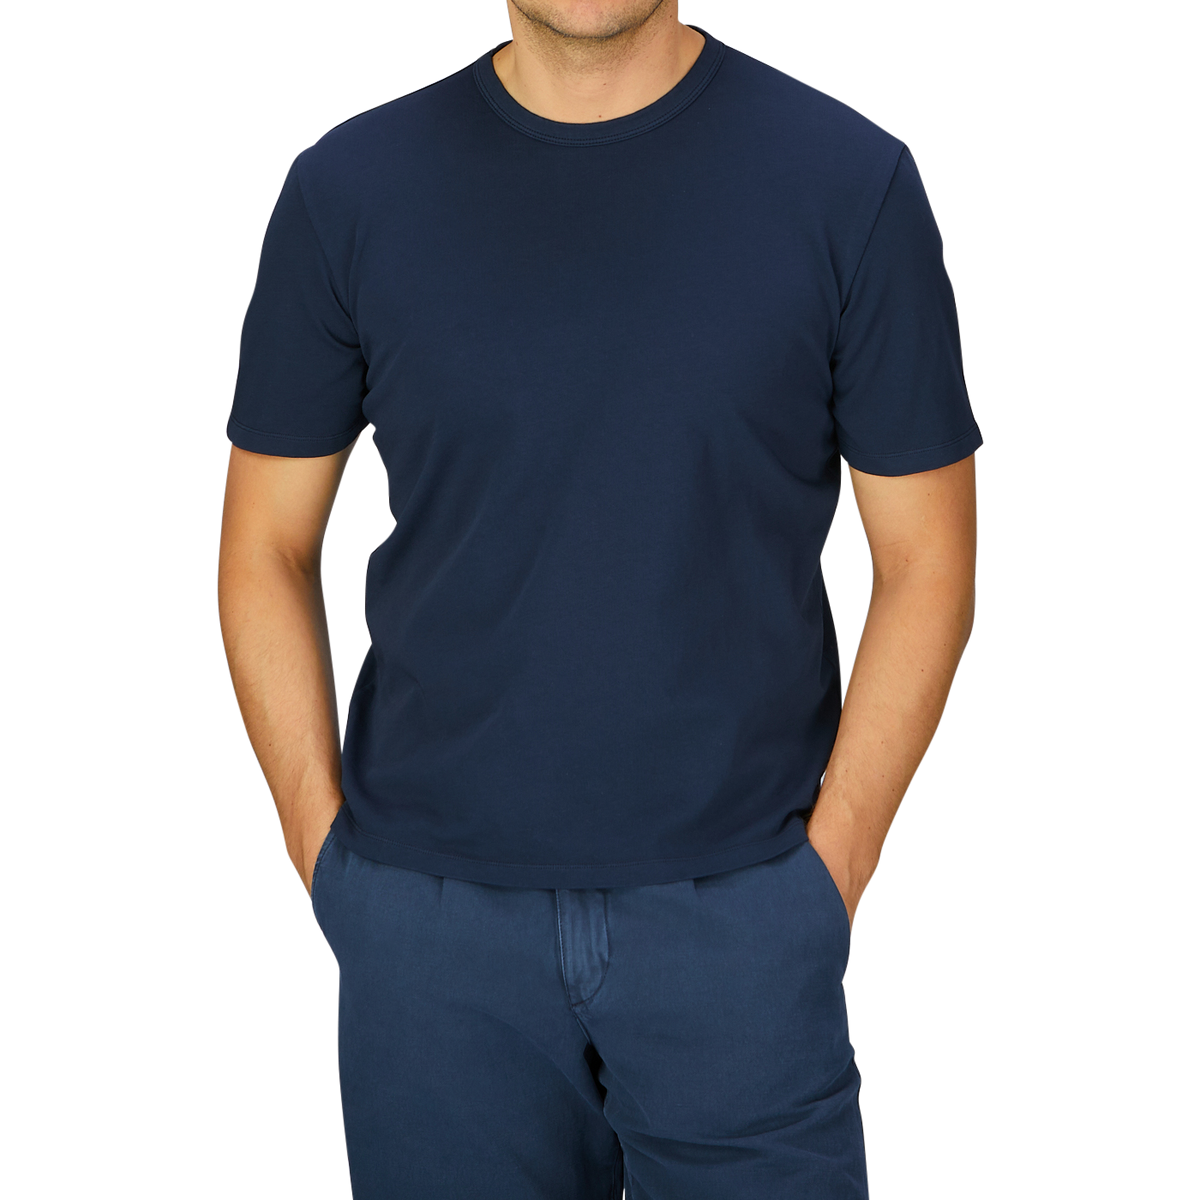 A man wearing a Navy Blue Heavy Organic Cotton T-Shirt by the Italian brand Tela Genova and blue pants standing against a grey background.